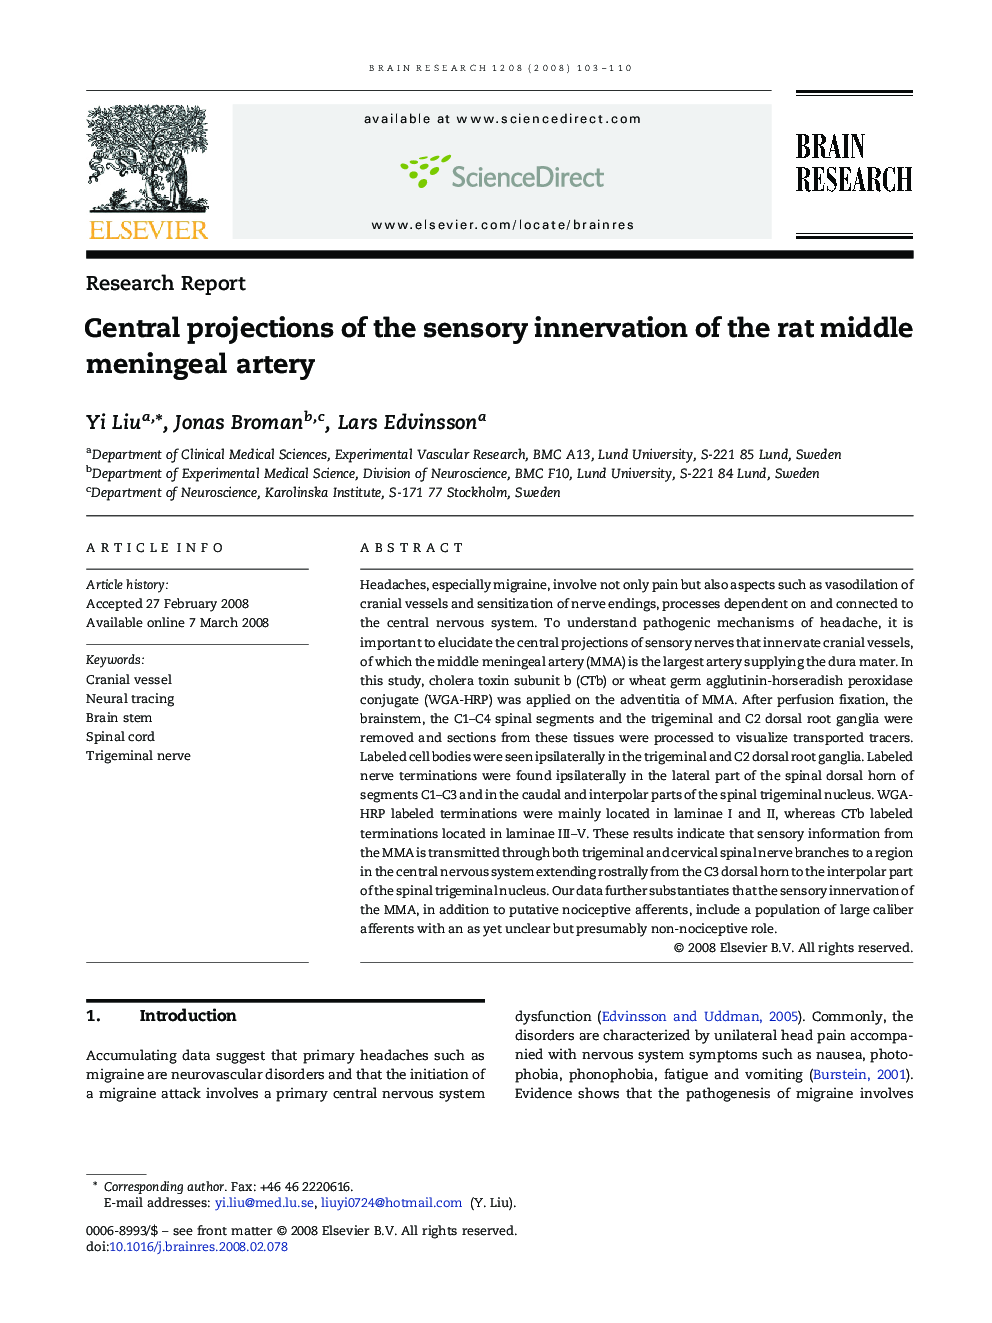 Central projections of the sensory innervation of the rat middle meningeal artery